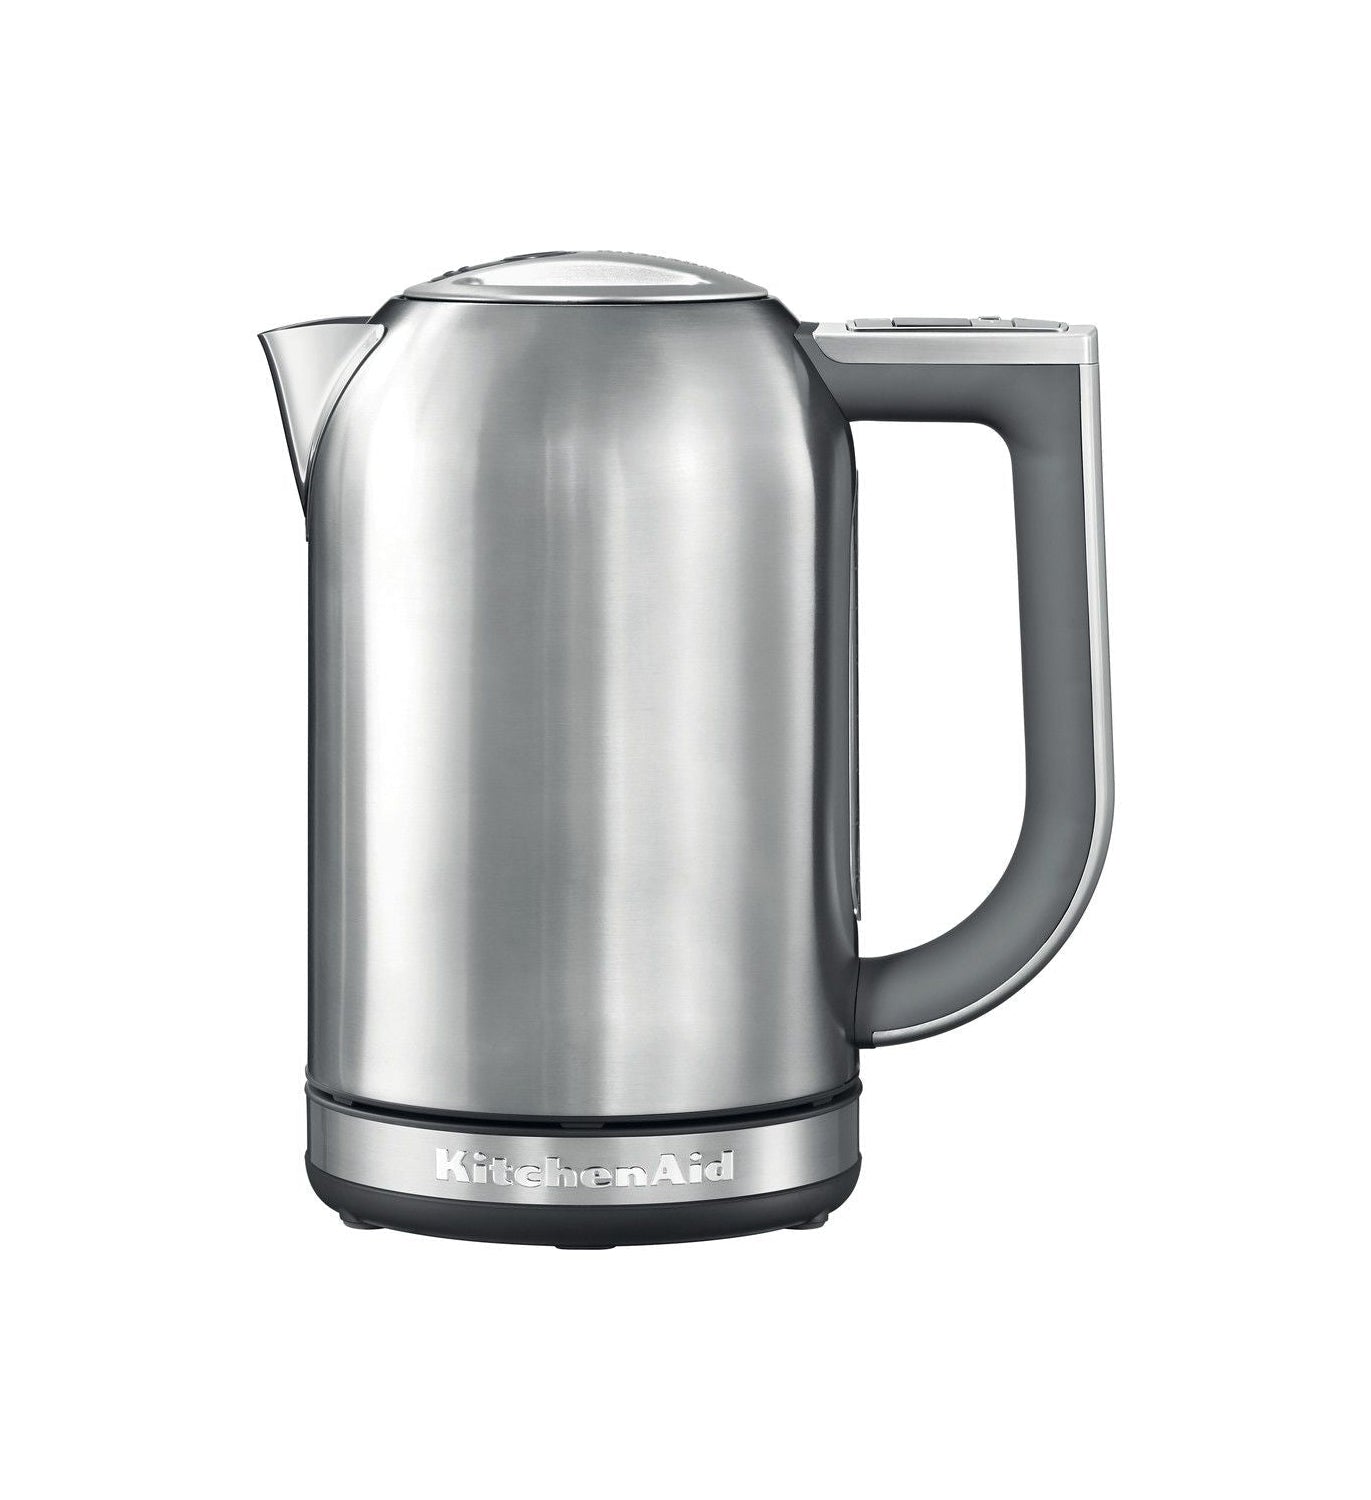 Kitchen Aid 5 Kek1722 Artisan Variable Temperature Kettle 1.7 L, Stainless Steel